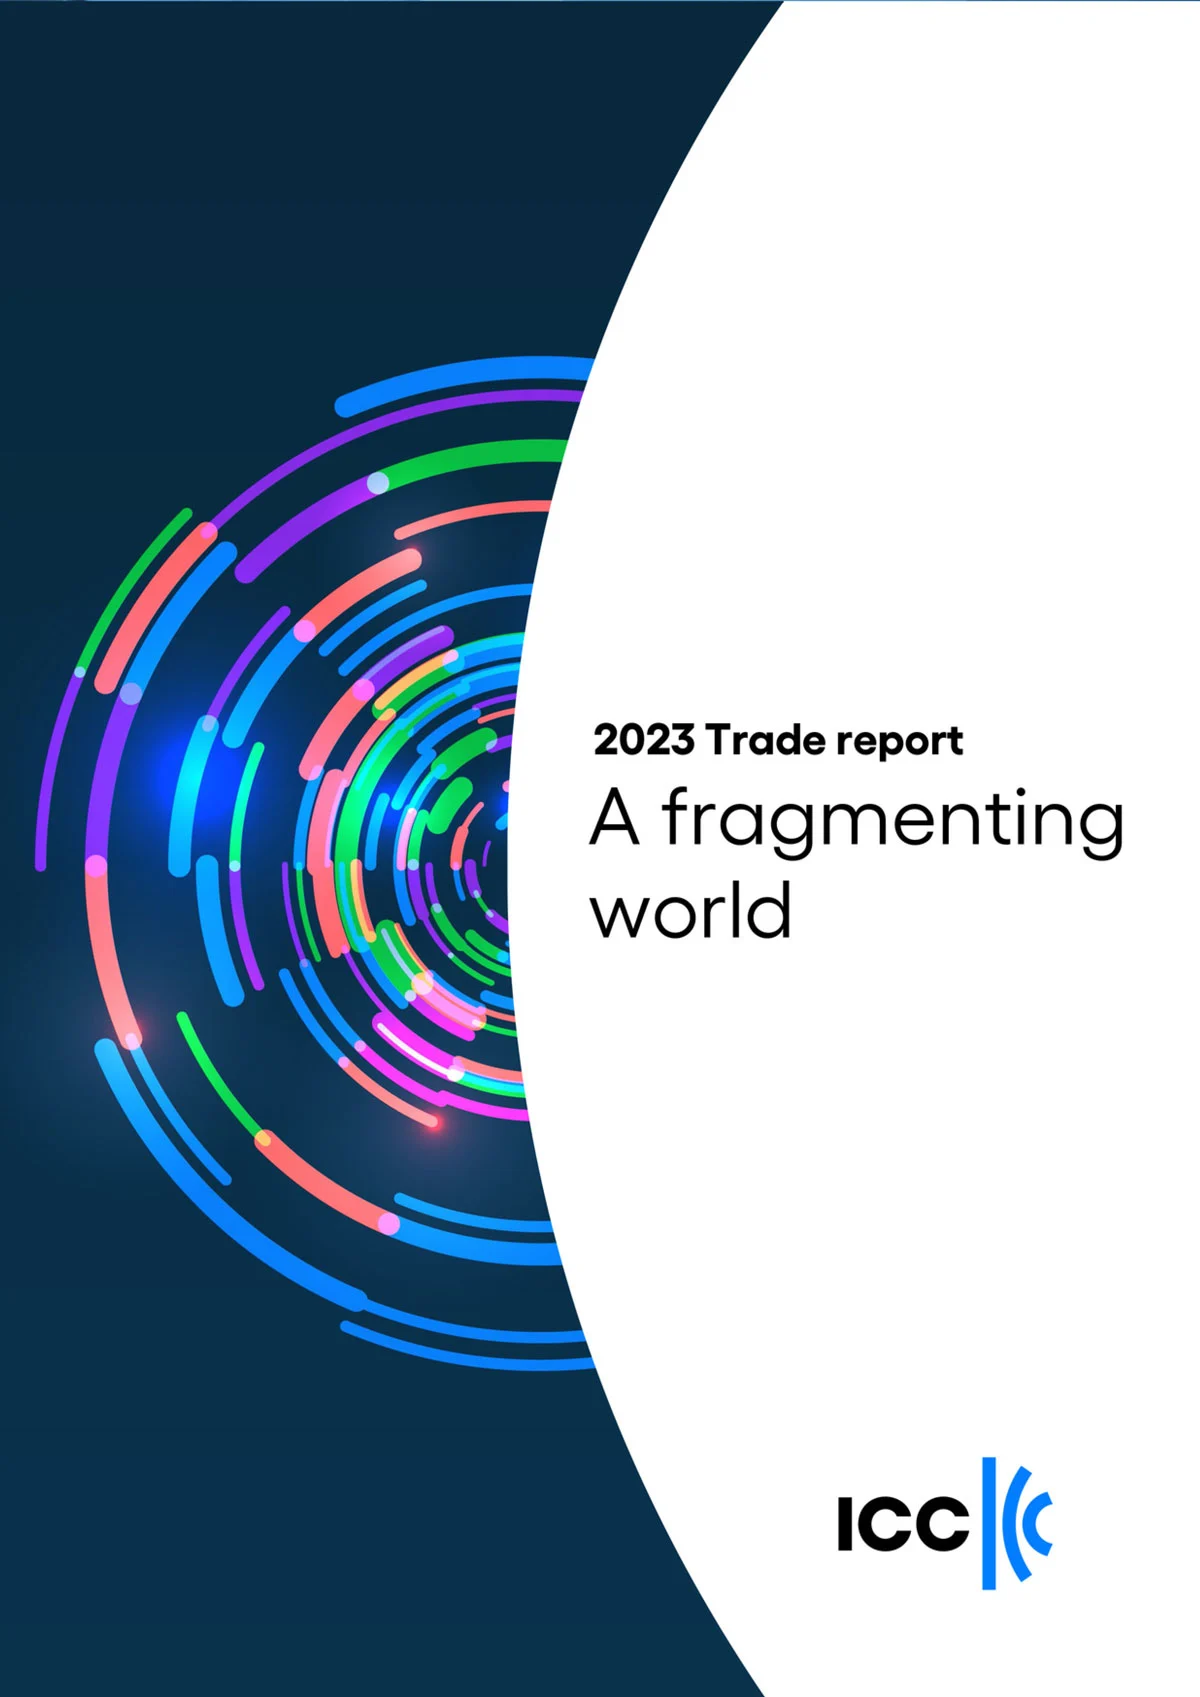 ICC 2023 Trade Report A fragmenting world